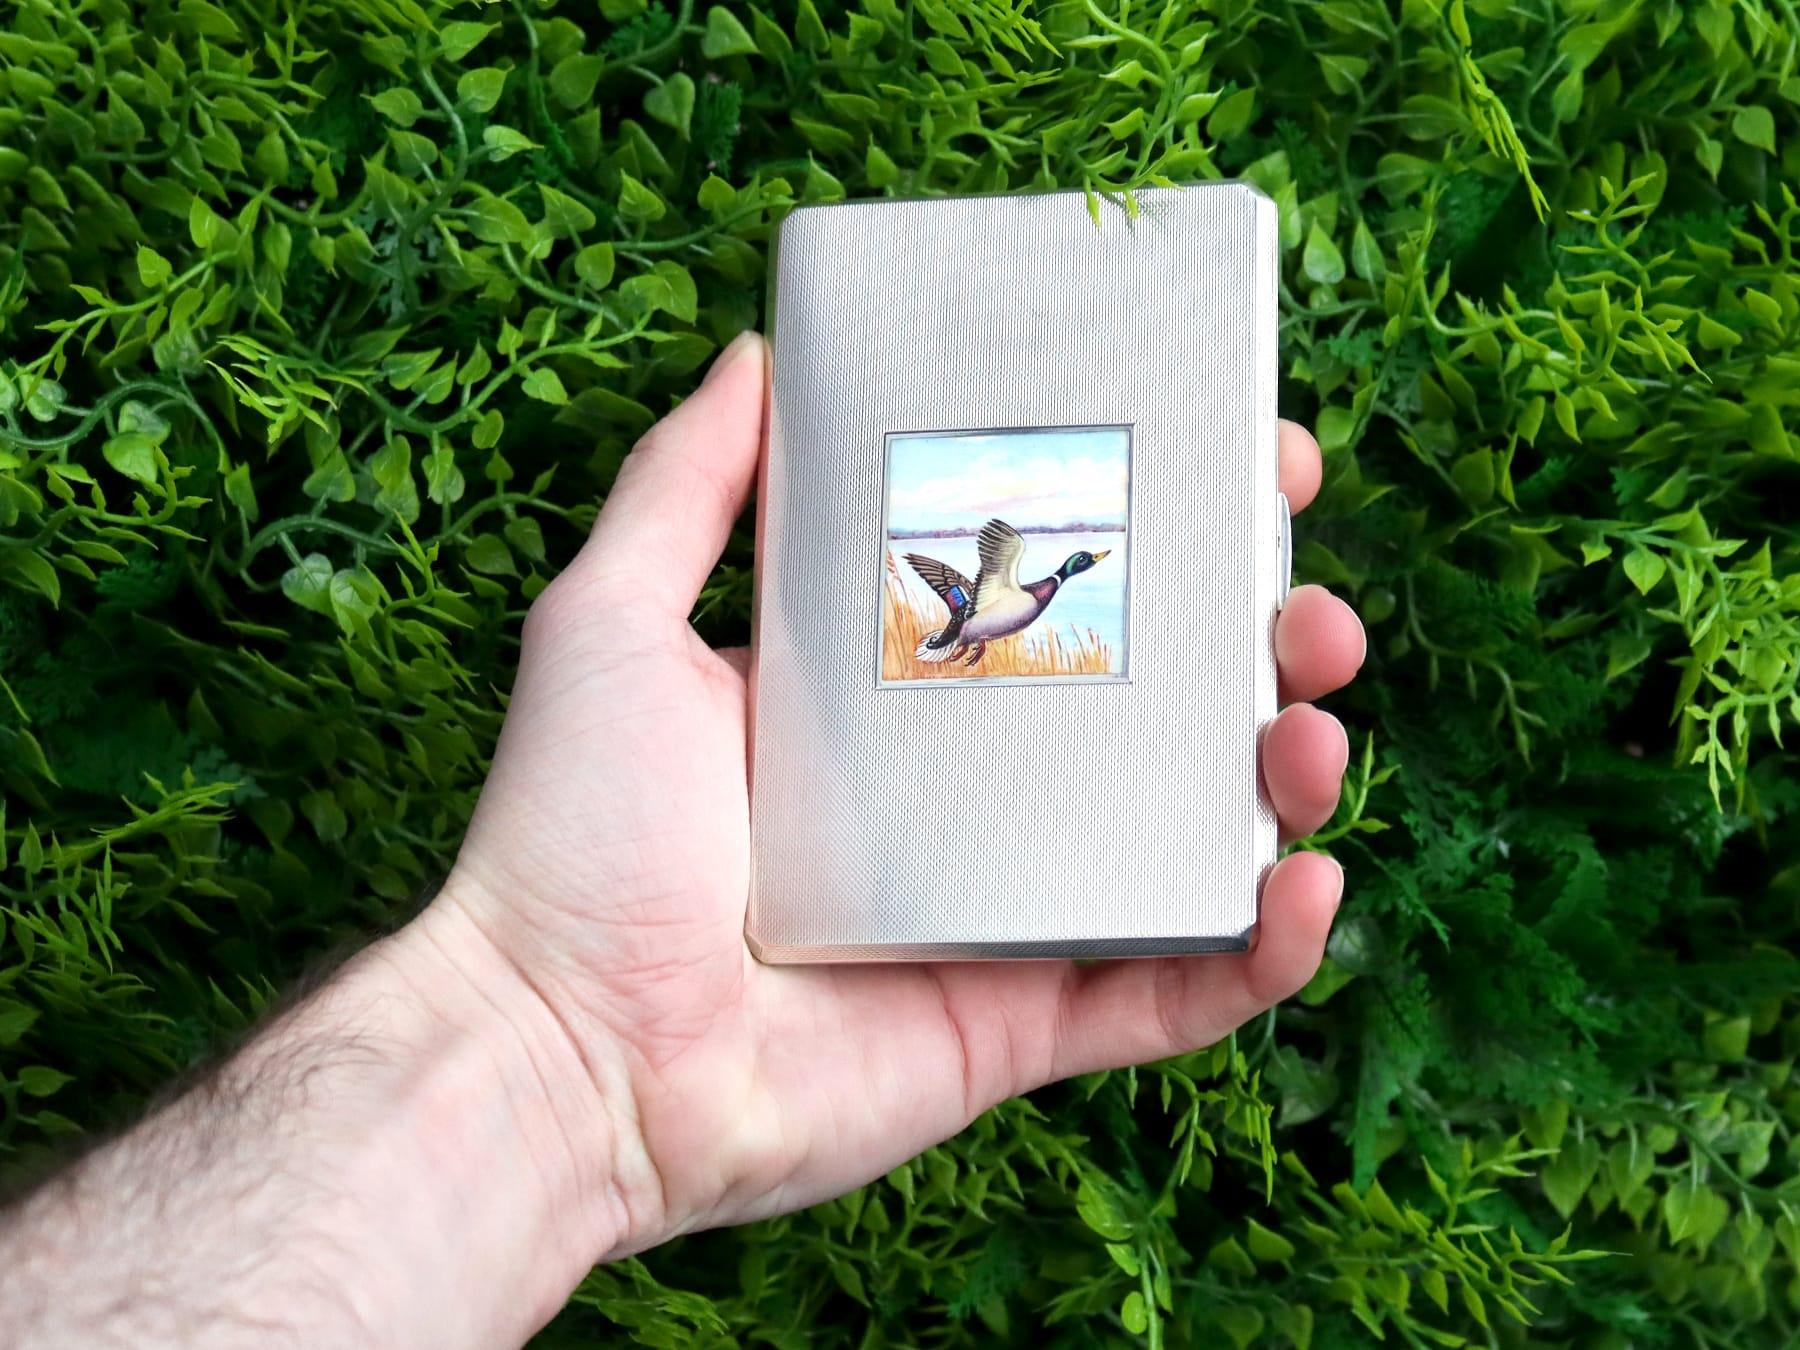 An exceptional, fine and impressive vintage George VI English sterling silver and enamel cigarette case; an addition to our collectable silverware collection.

This exceptional vintage sterling silver cigarette case has a plain rectangular form